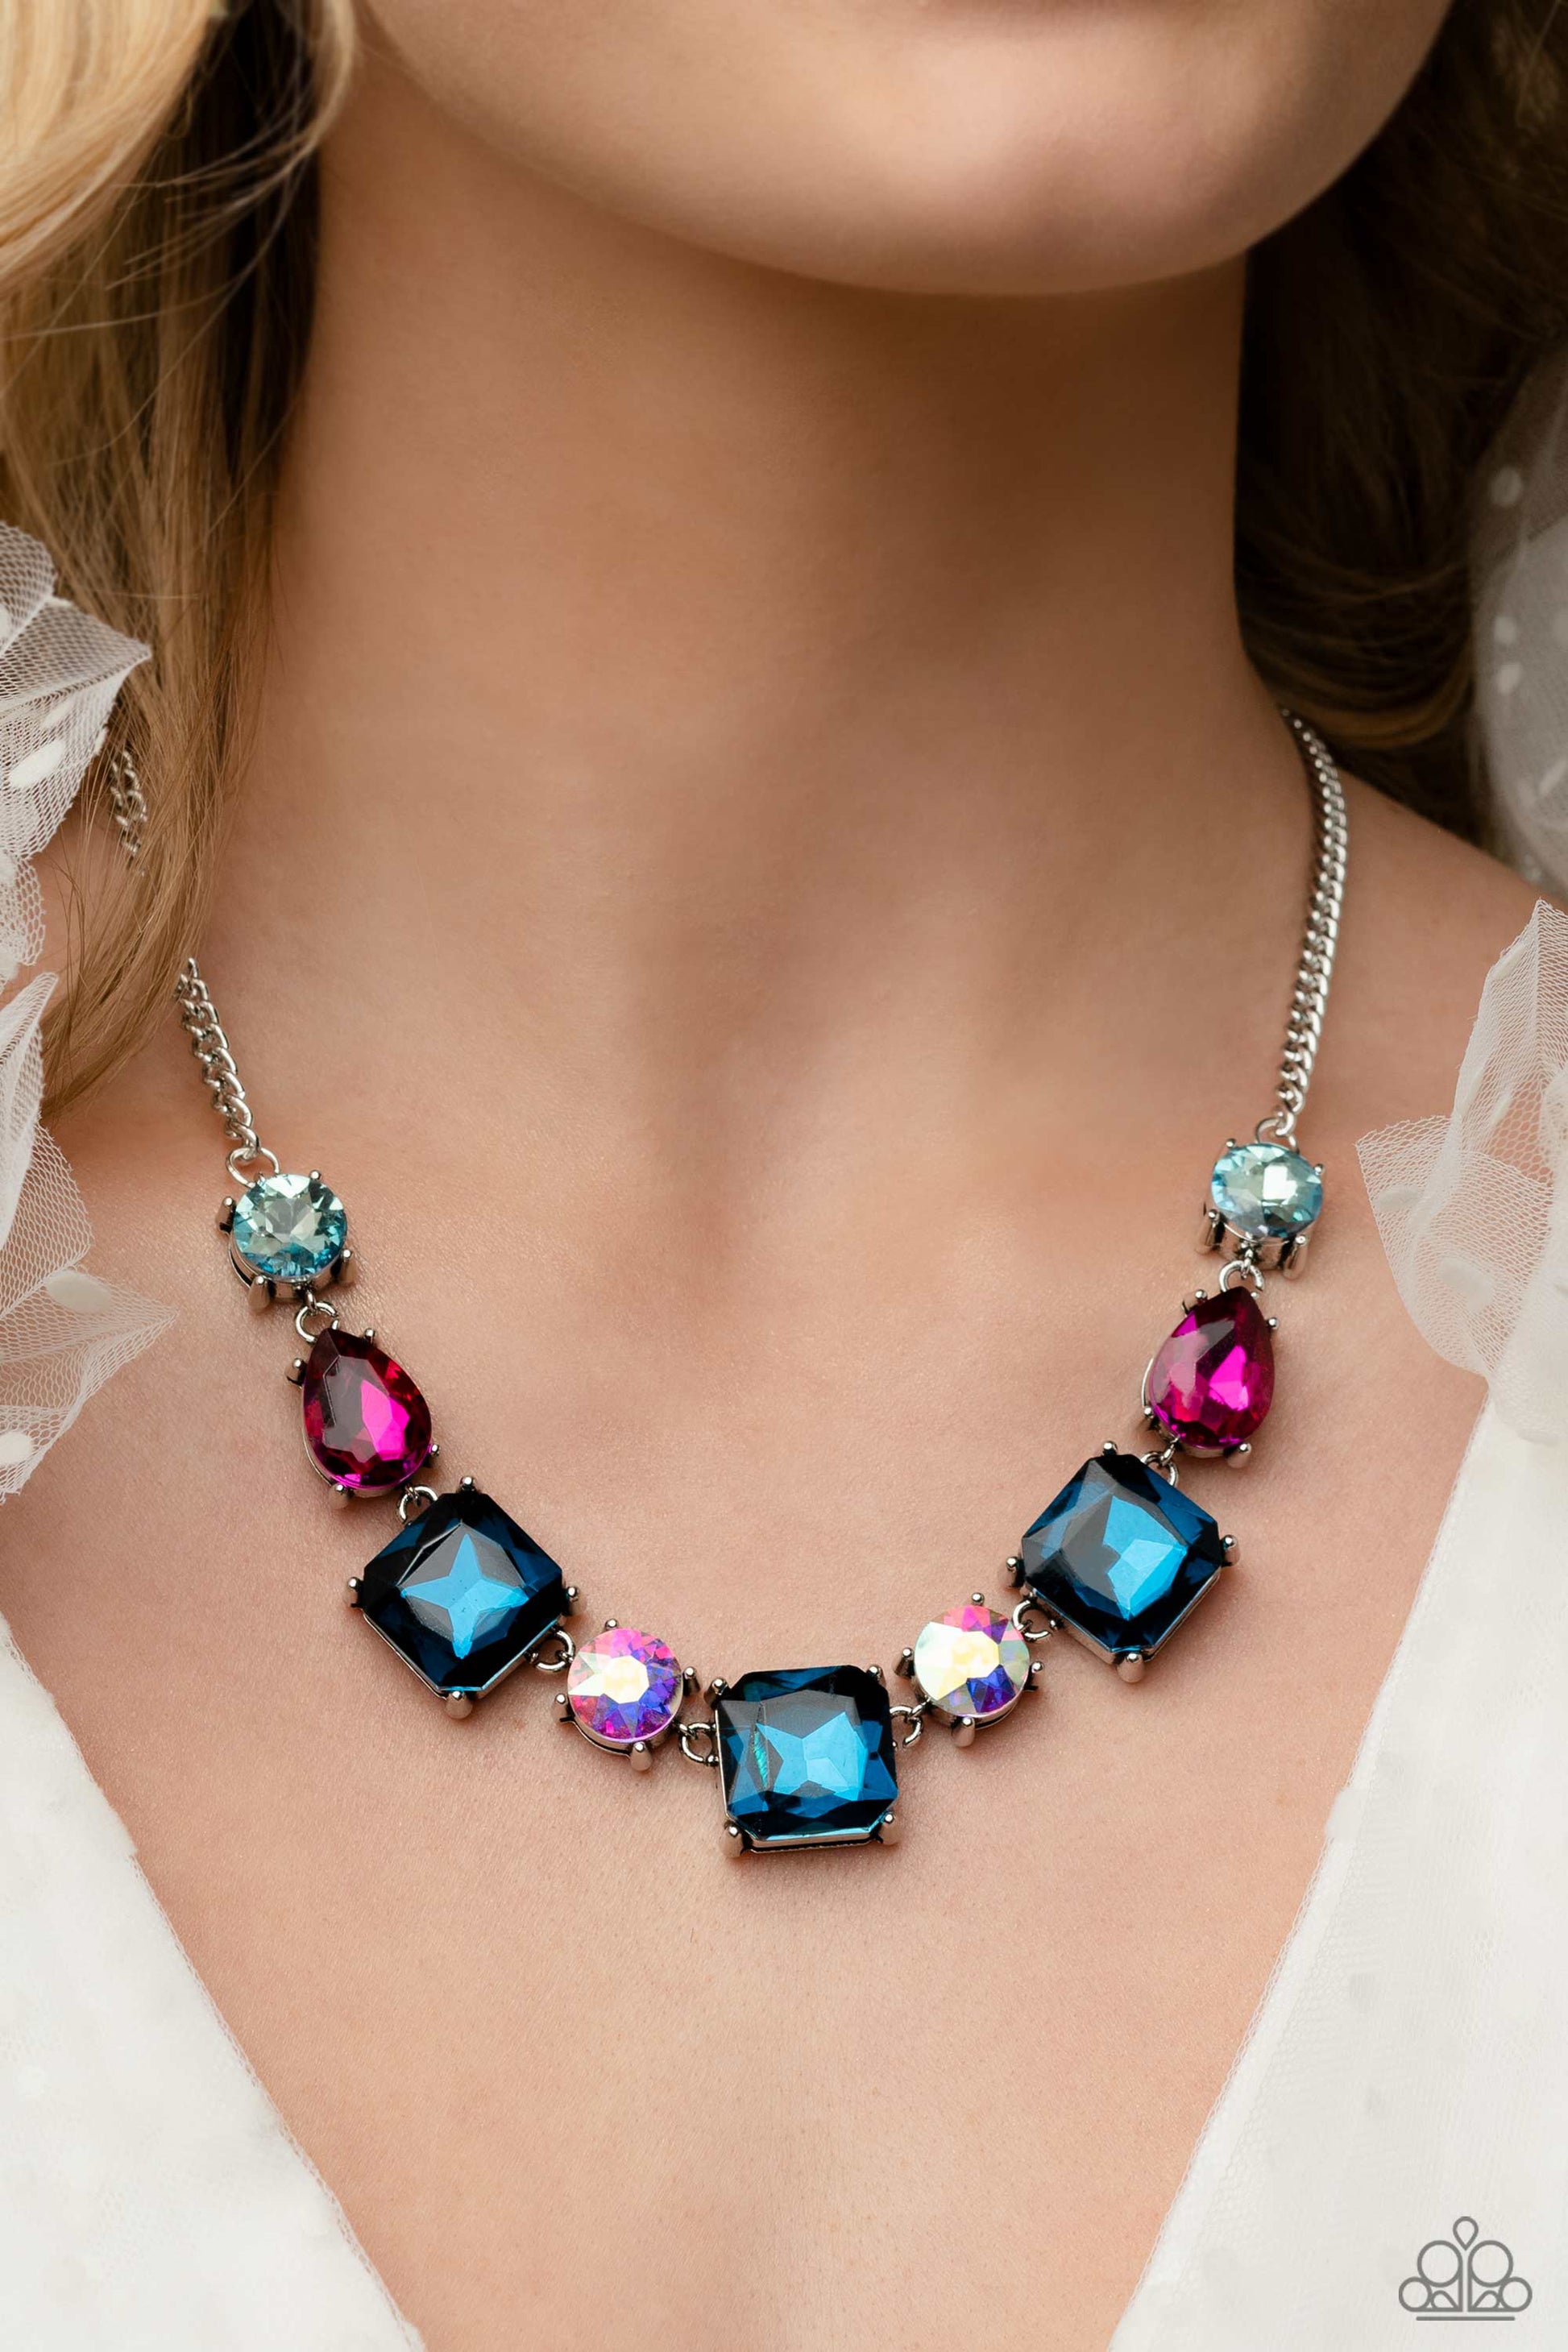 ﻿Elevated Edge Multi Necklace - Paparazzi Accessories  Encased within thick, pronged, elevated silver settings, a geometric collection of fuchsia, light blue, dark blue, and iridescent rhinestones, featured in square, teardrop, and round shapes coalesces down the neckline for a gritty, yet glamorous display. Features an adjustable clasp closure. Due to its prismatic palette, color may vary.  Sold as one individual necklace. Includes one pair of matching earrings.  P2RE-MTXX-215XX